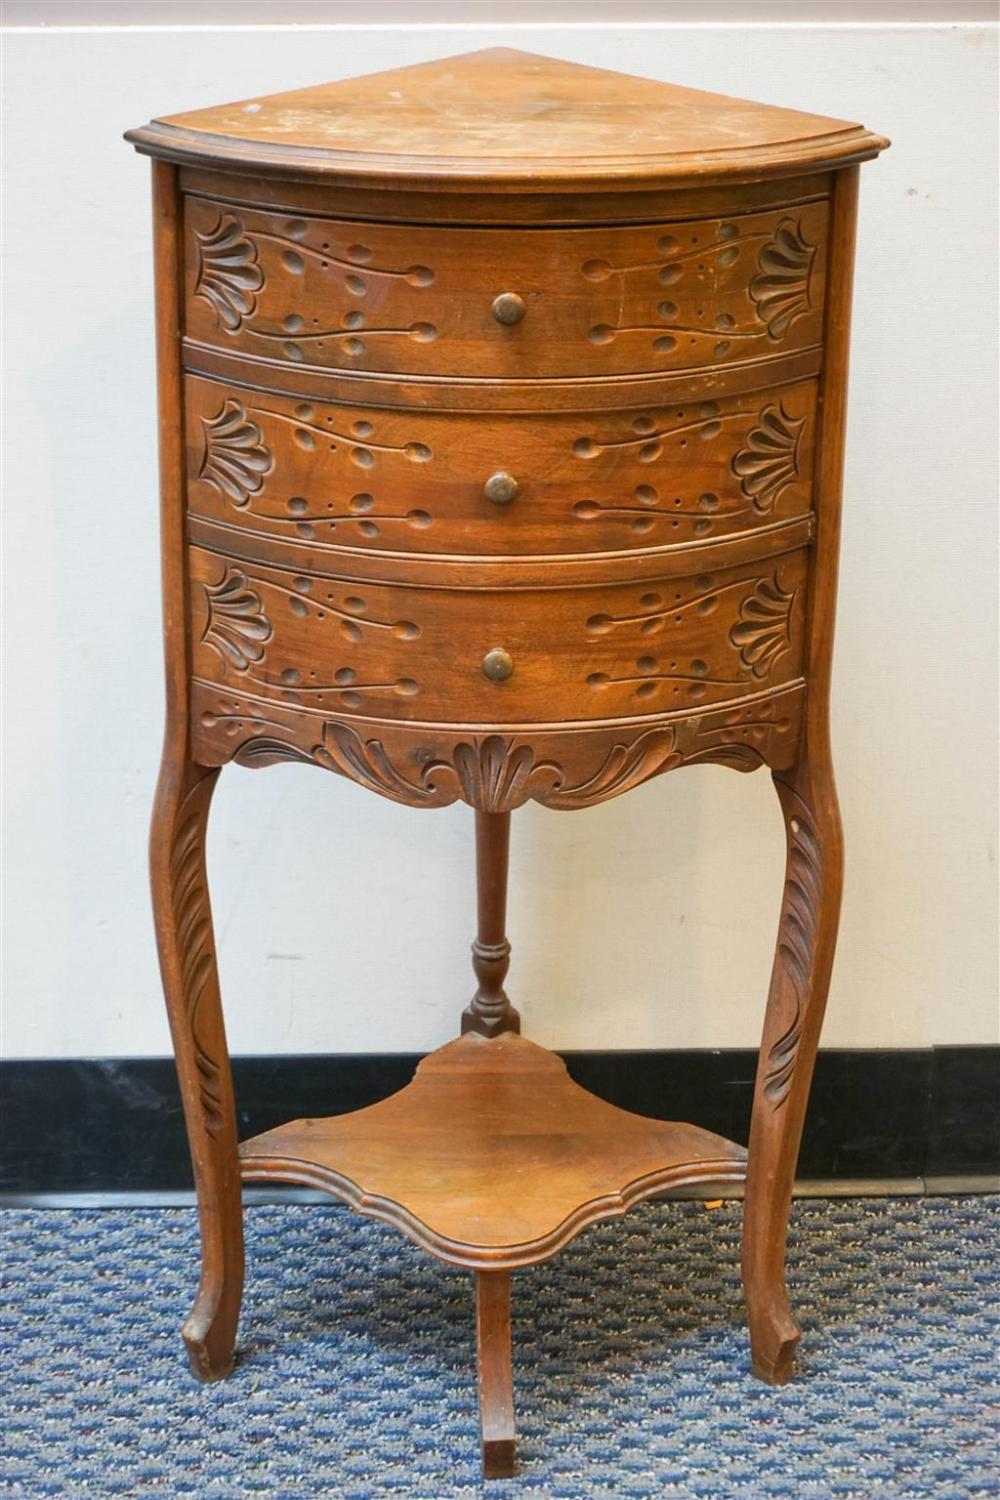 PROVINCIAL STYLE FRUITWOOD CORNER